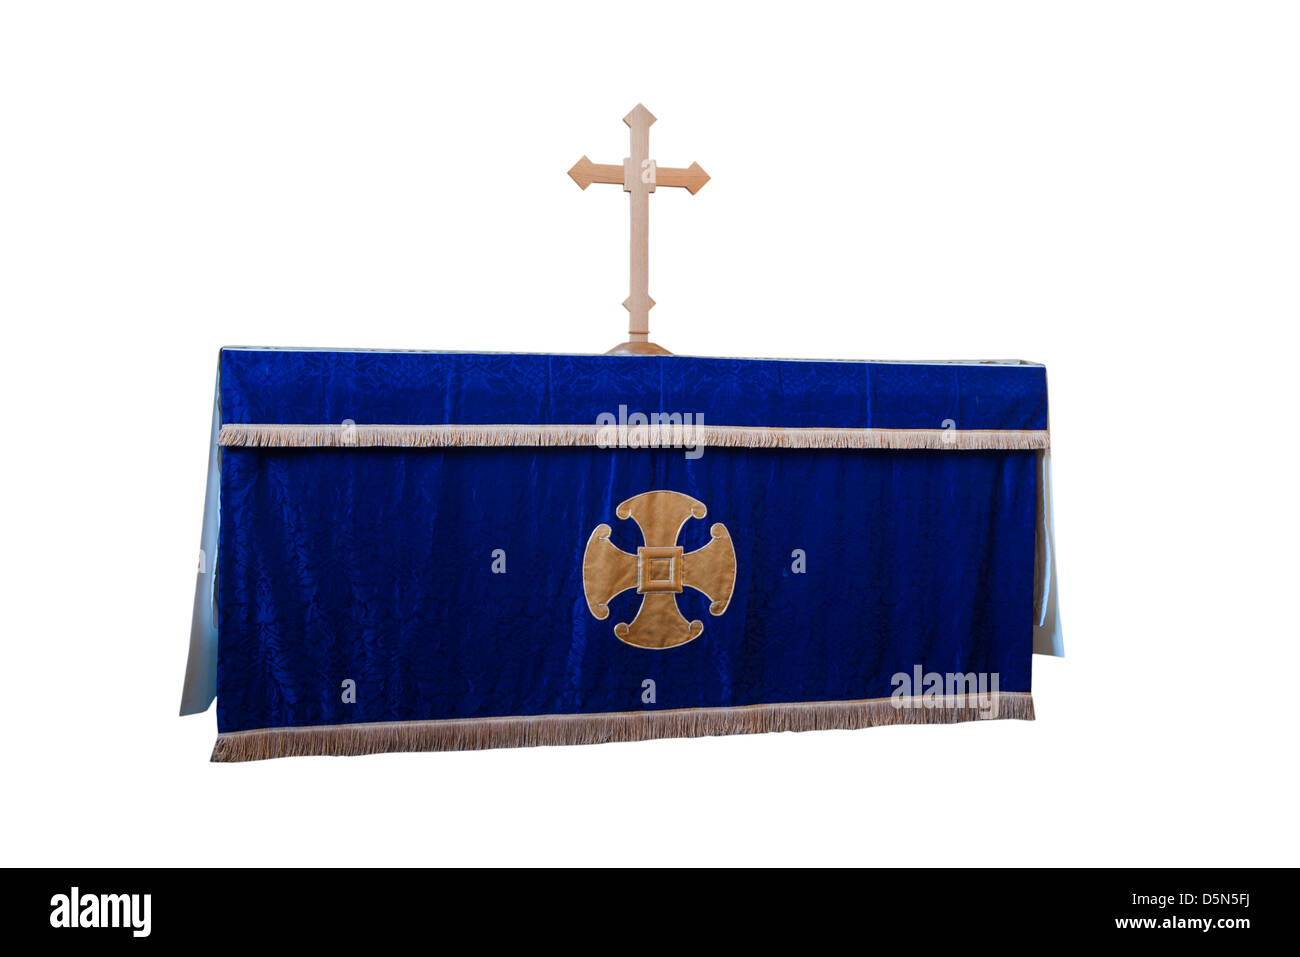 Church Altar With Cloth Candles and A Cross Stock Photo